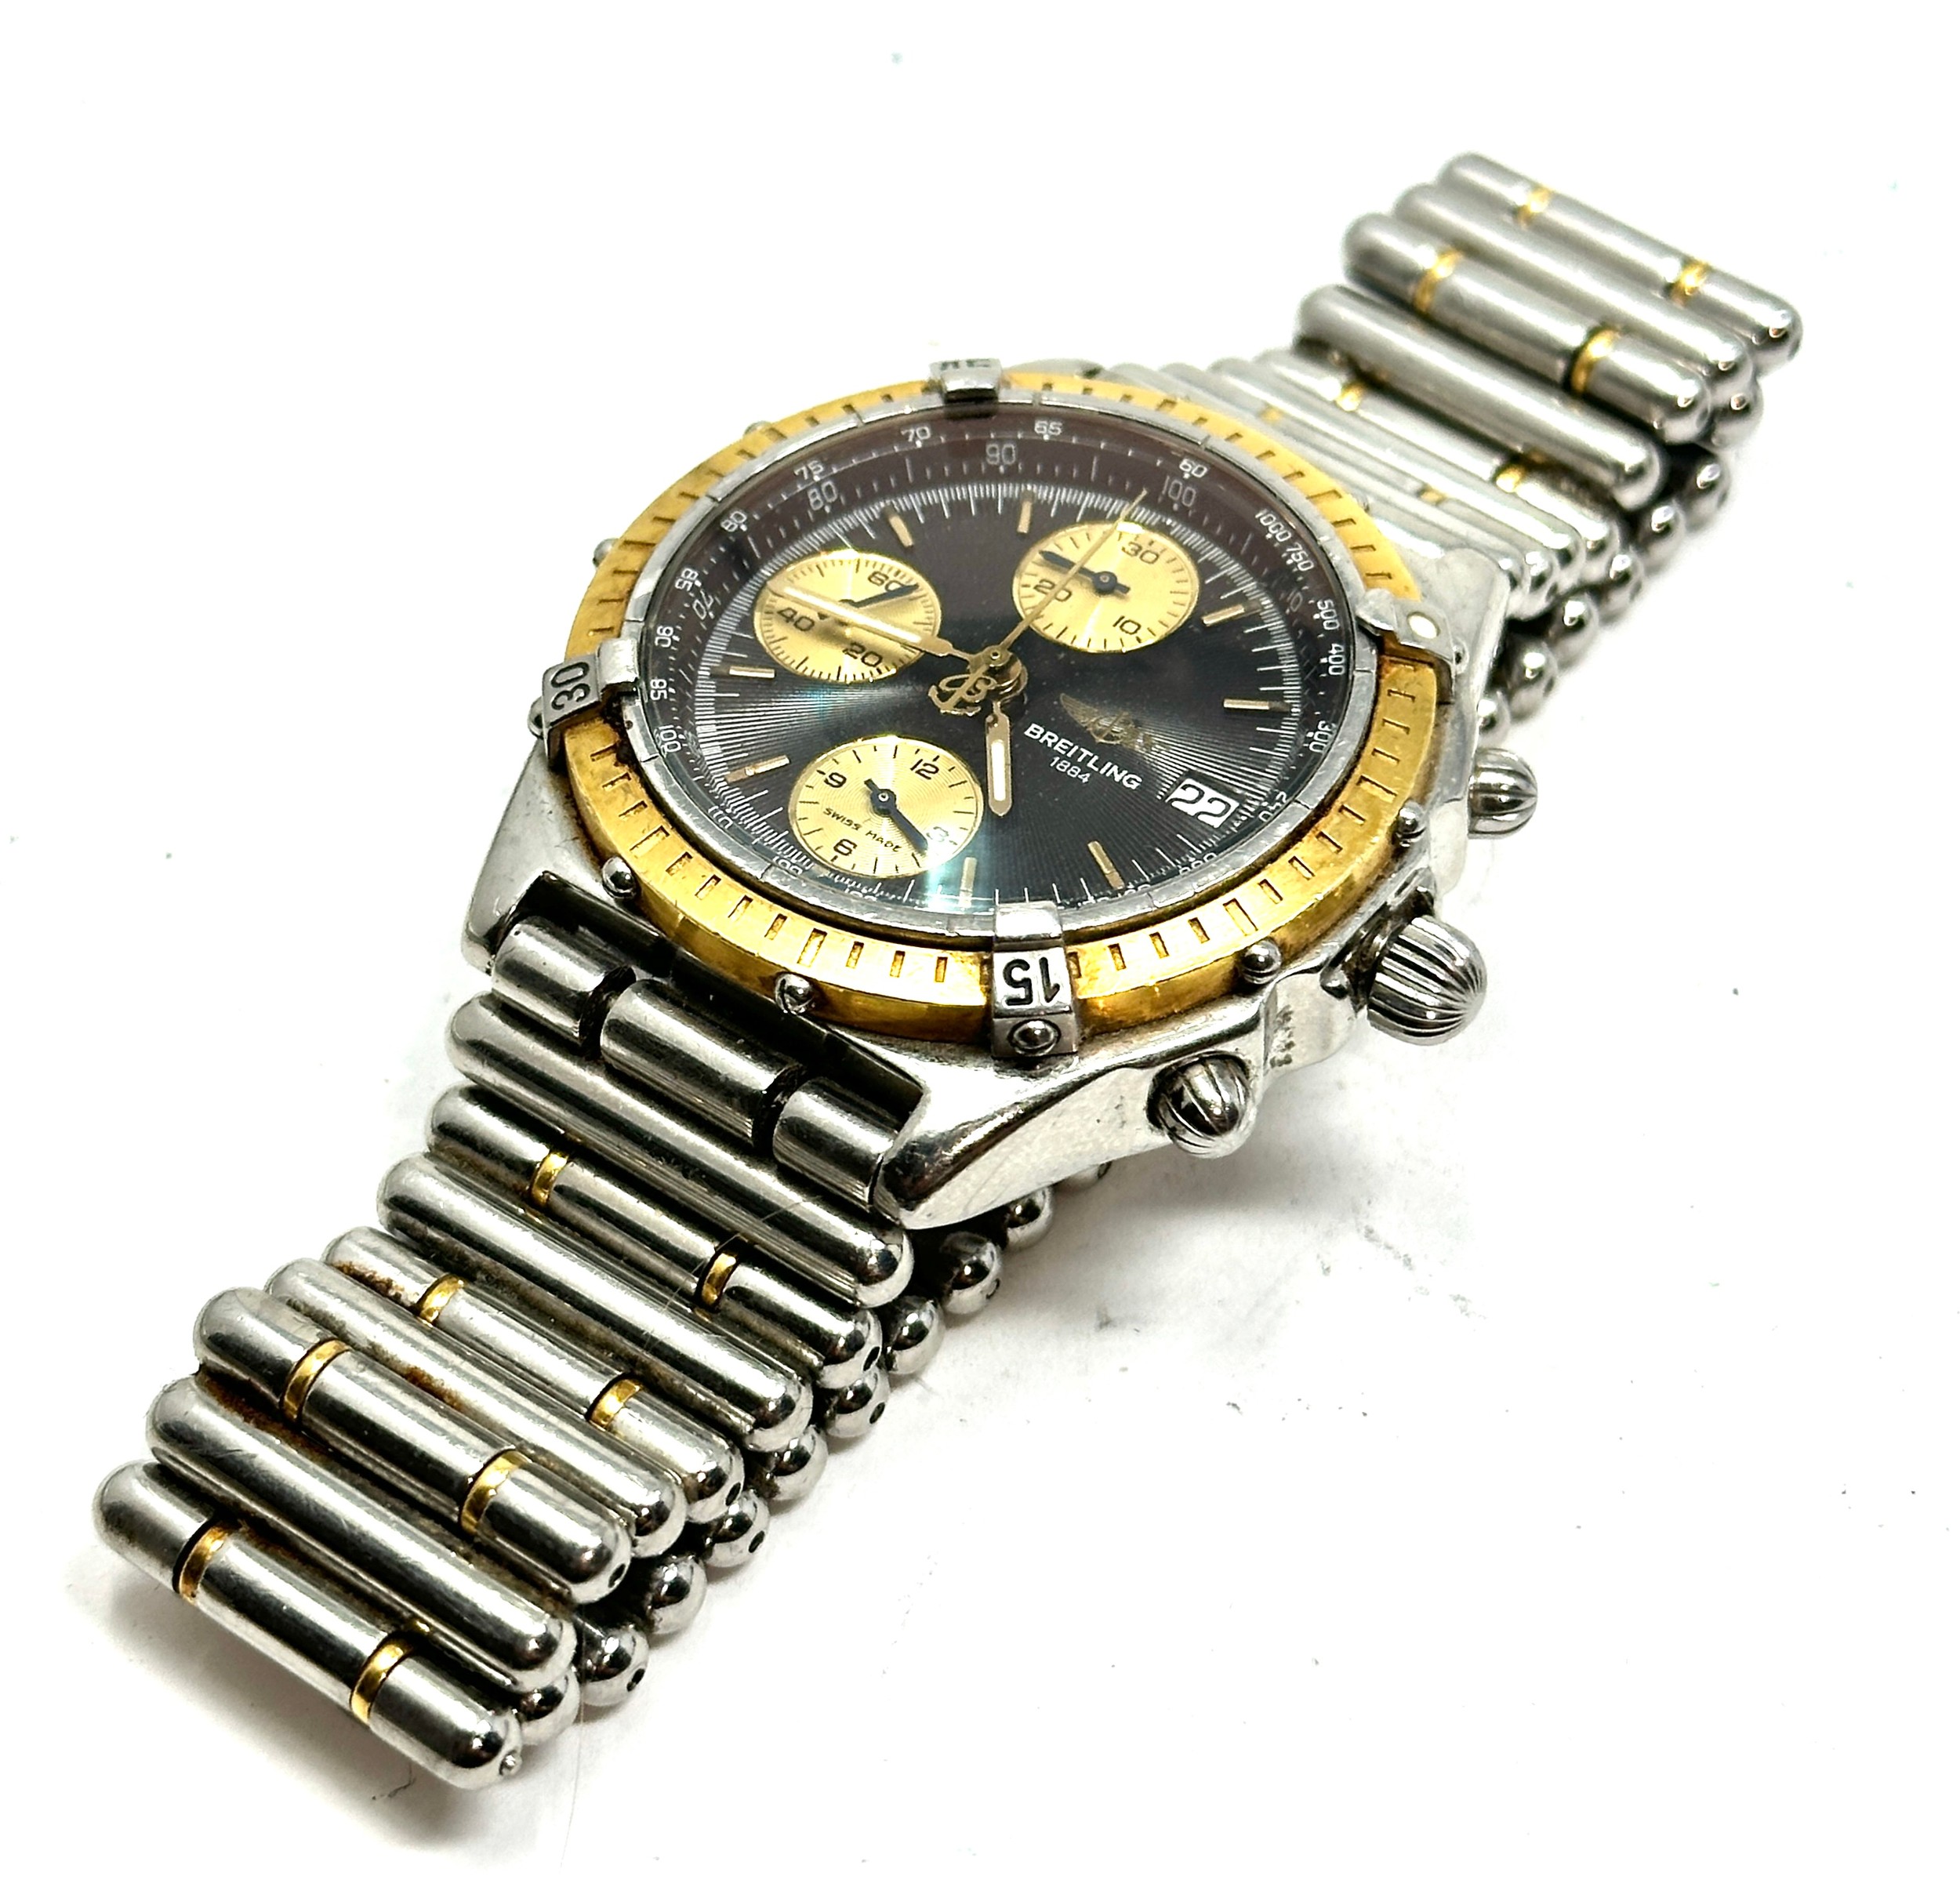 BREITLING 1884 chronograph steel / gold automatic gents wristwatch D130487the watch is ticking - Image 5 of 7